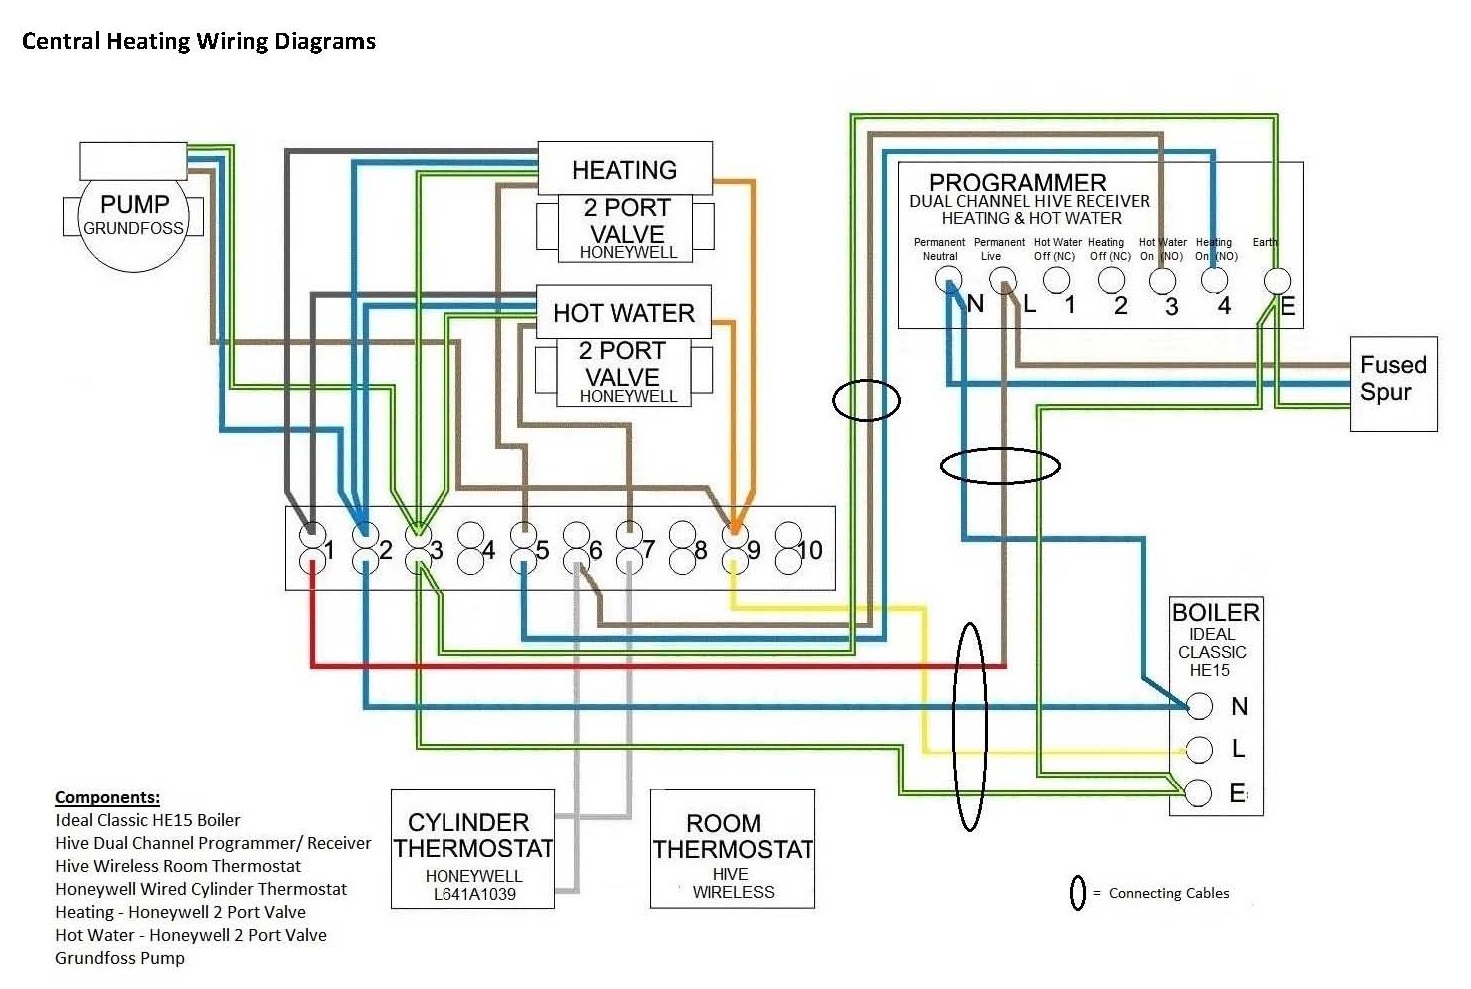 Hive and Central Heating Wiring | DIYnot Forums  Hive Heating Control Wiring Diagram    DIYnot.com